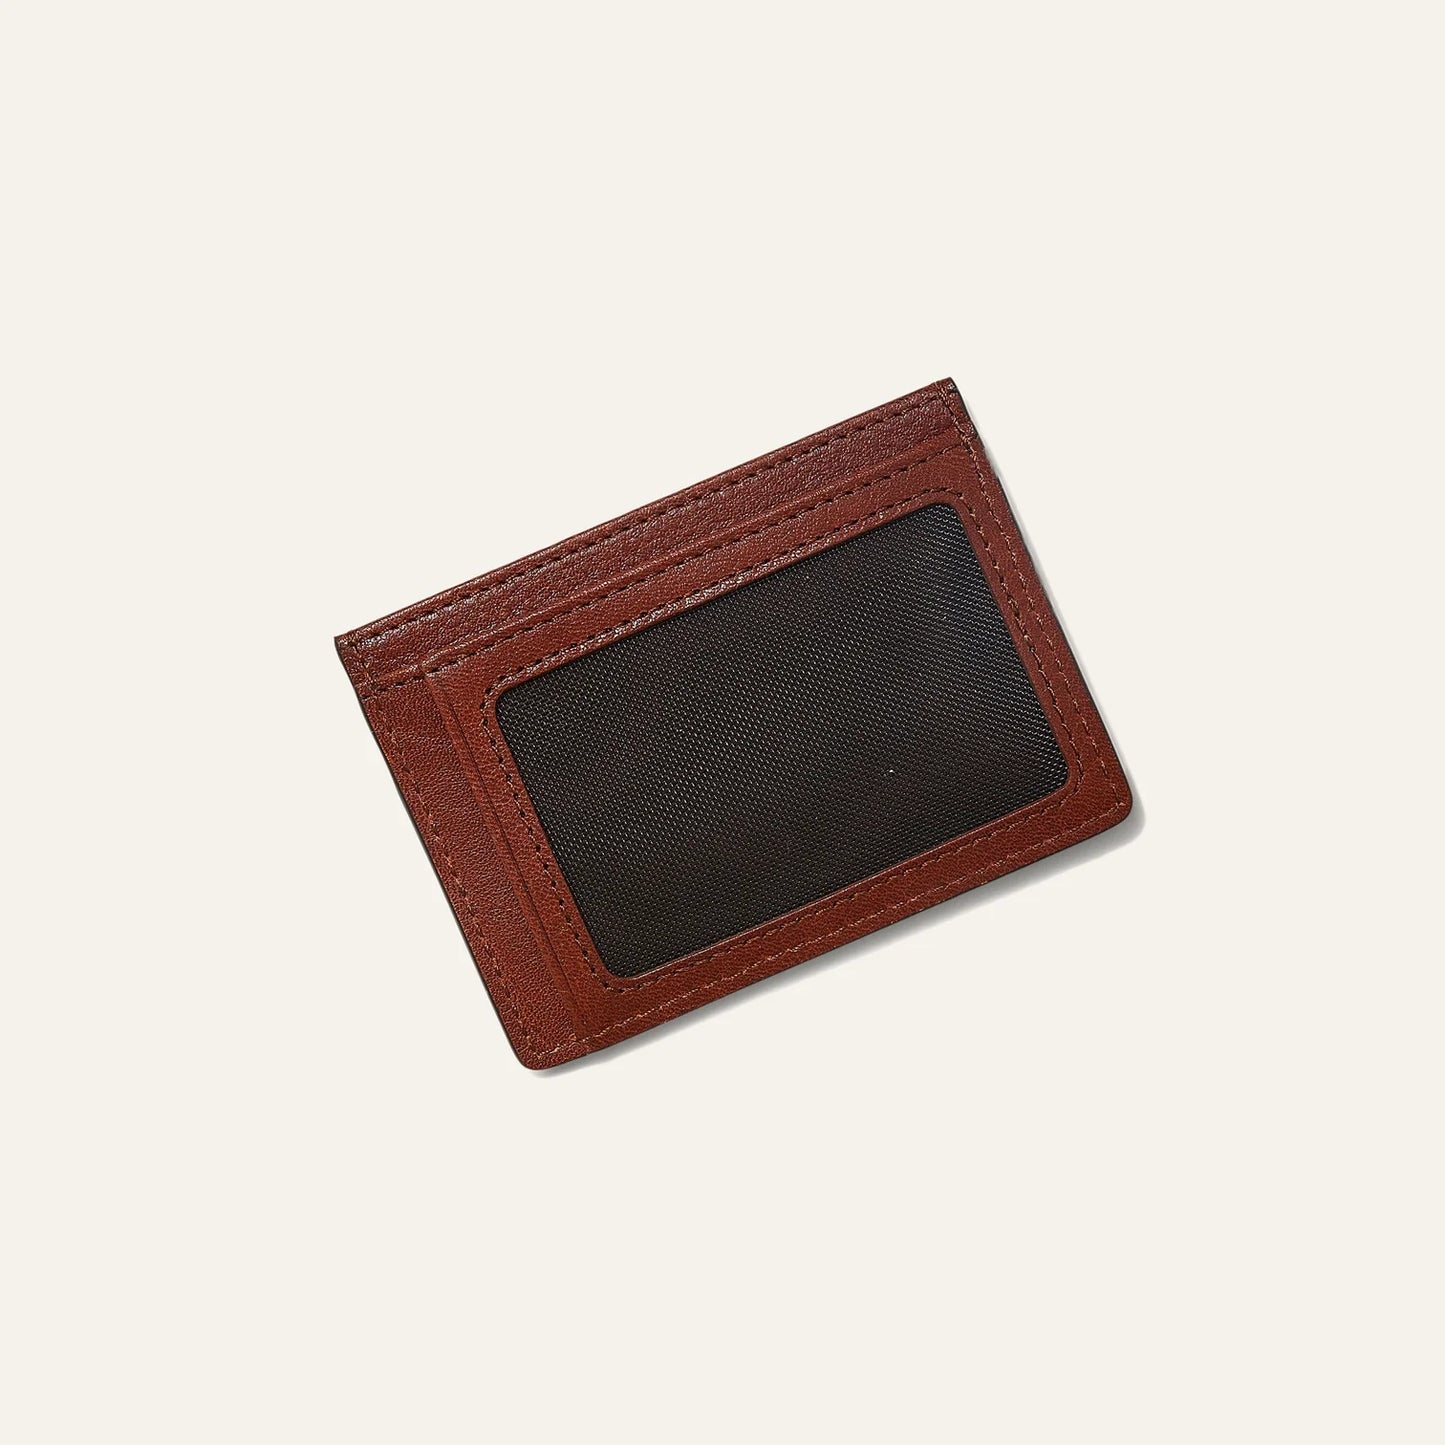 Will Leather Goods Classic Leather Card Case - Cognac